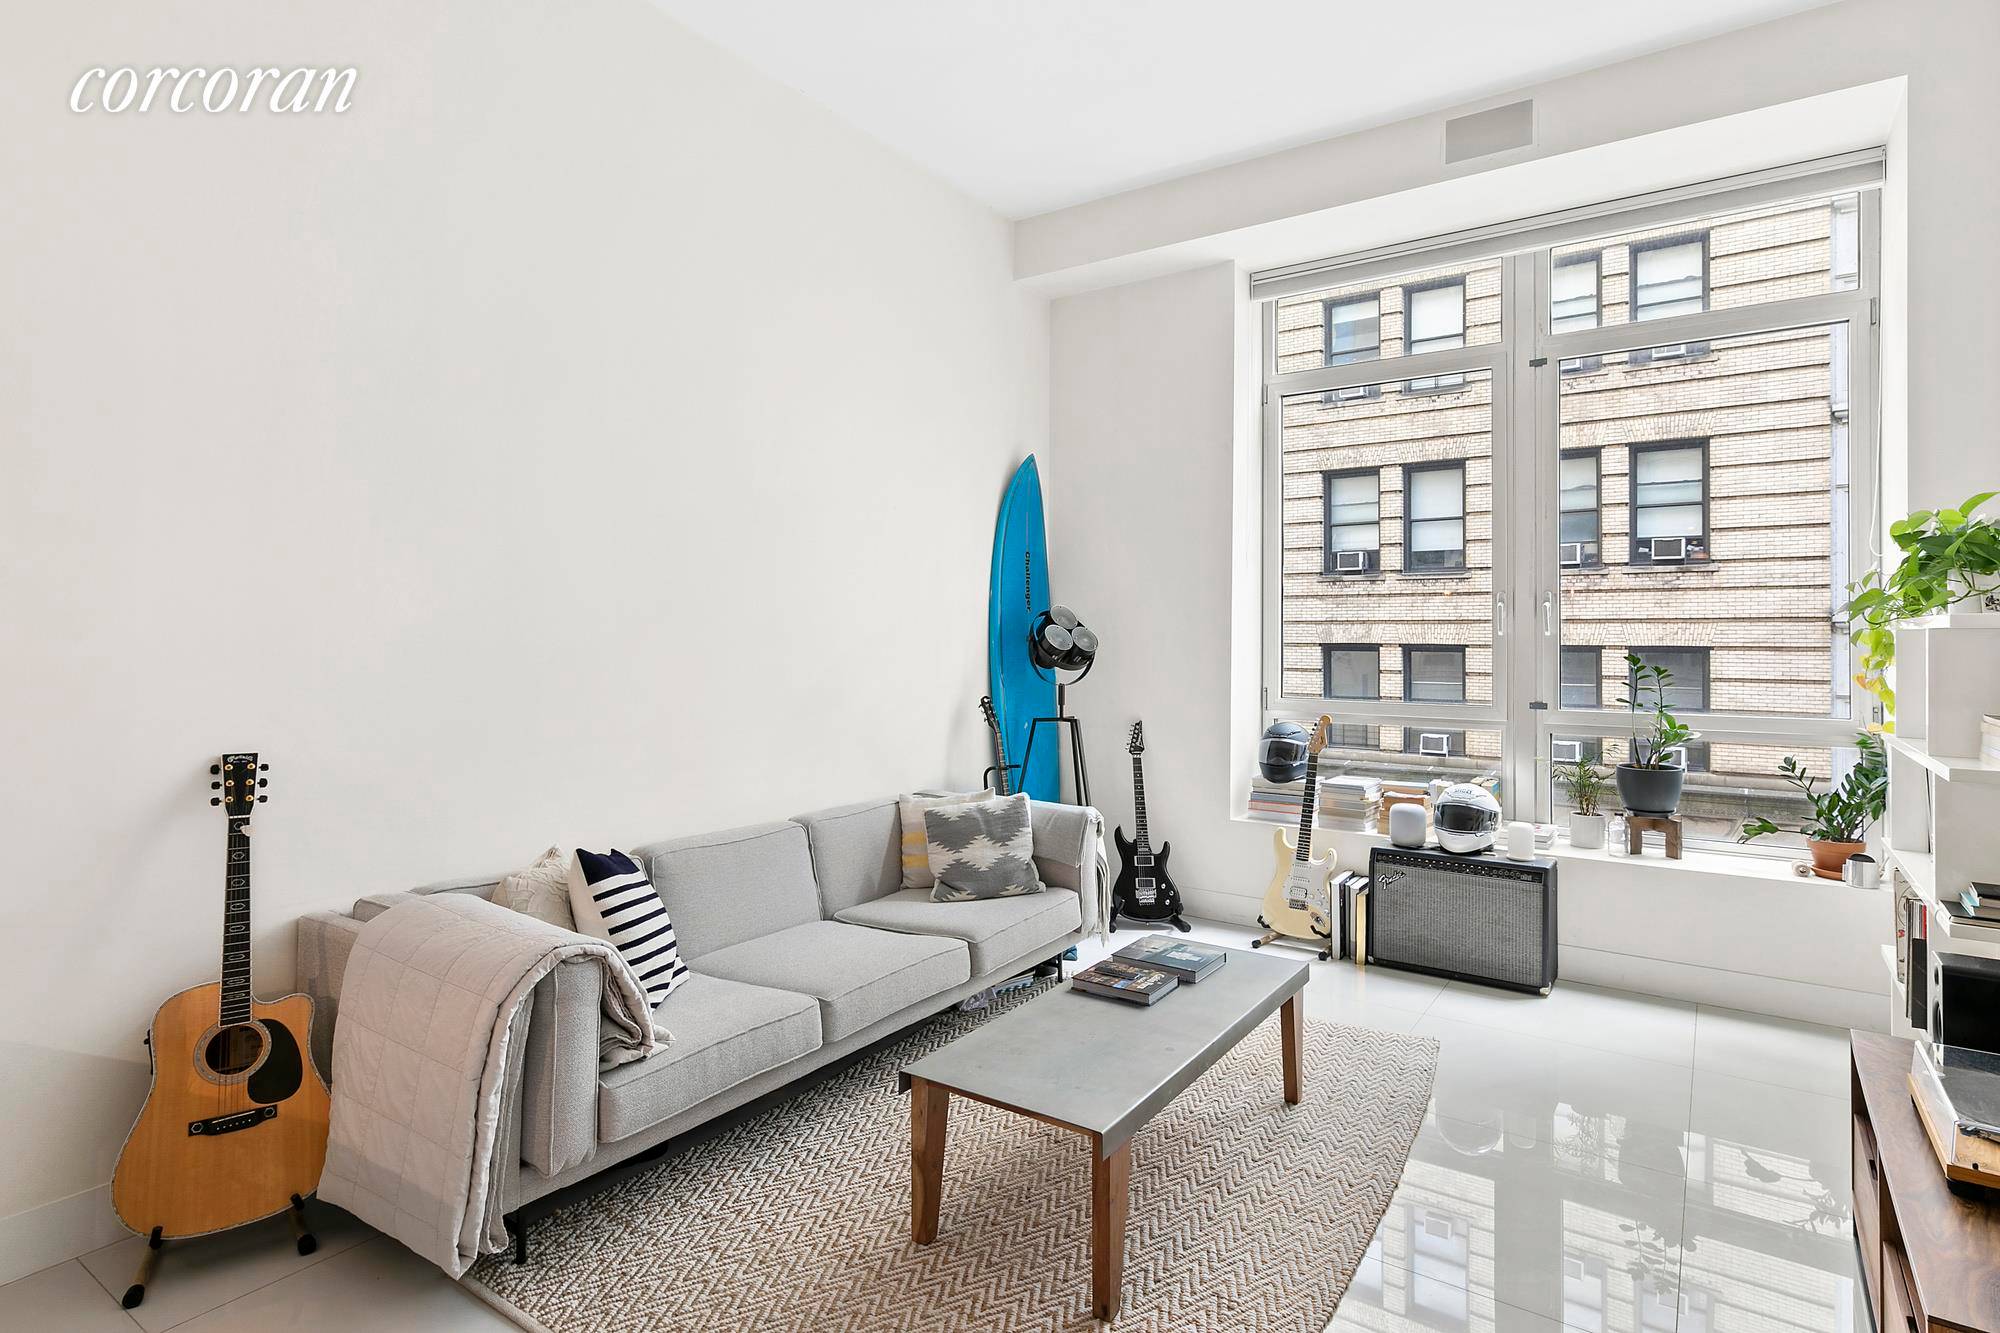 Lofty Aspirations ! Available Furnished or Unfurnished this modern and spacious designer studio loft in the Financial District has a lot to offer with soaring 11 foot ceilings, large open ...